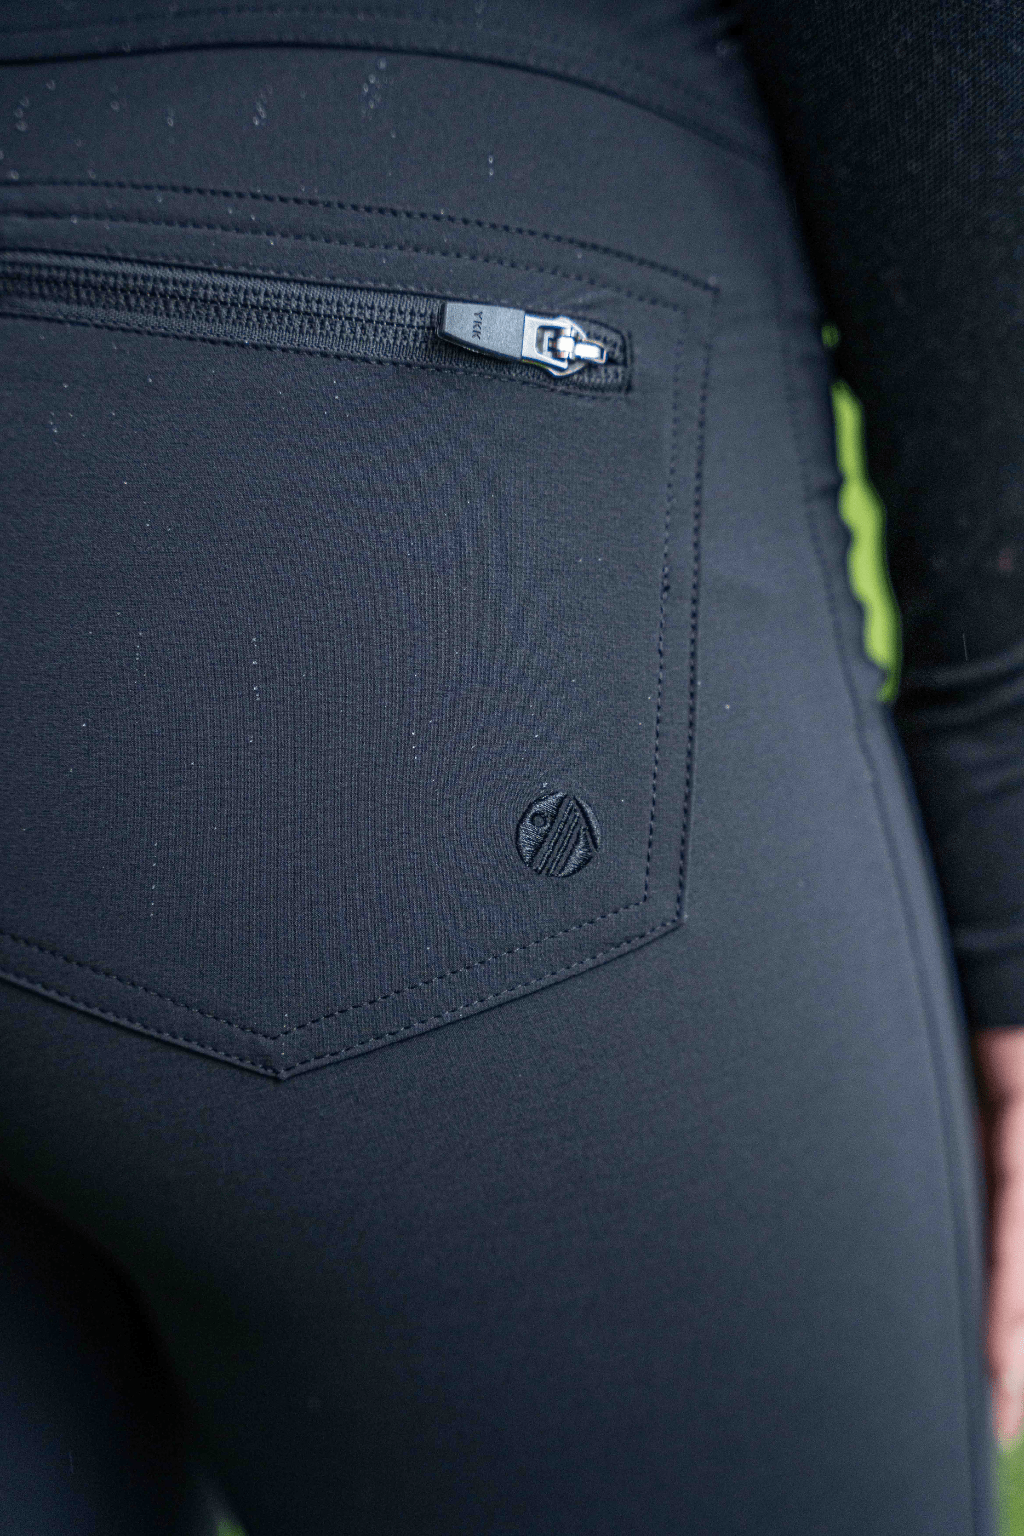 ACAI MAX Stretch Skinny Outdoor Trousers – Review – Abelia's Corner